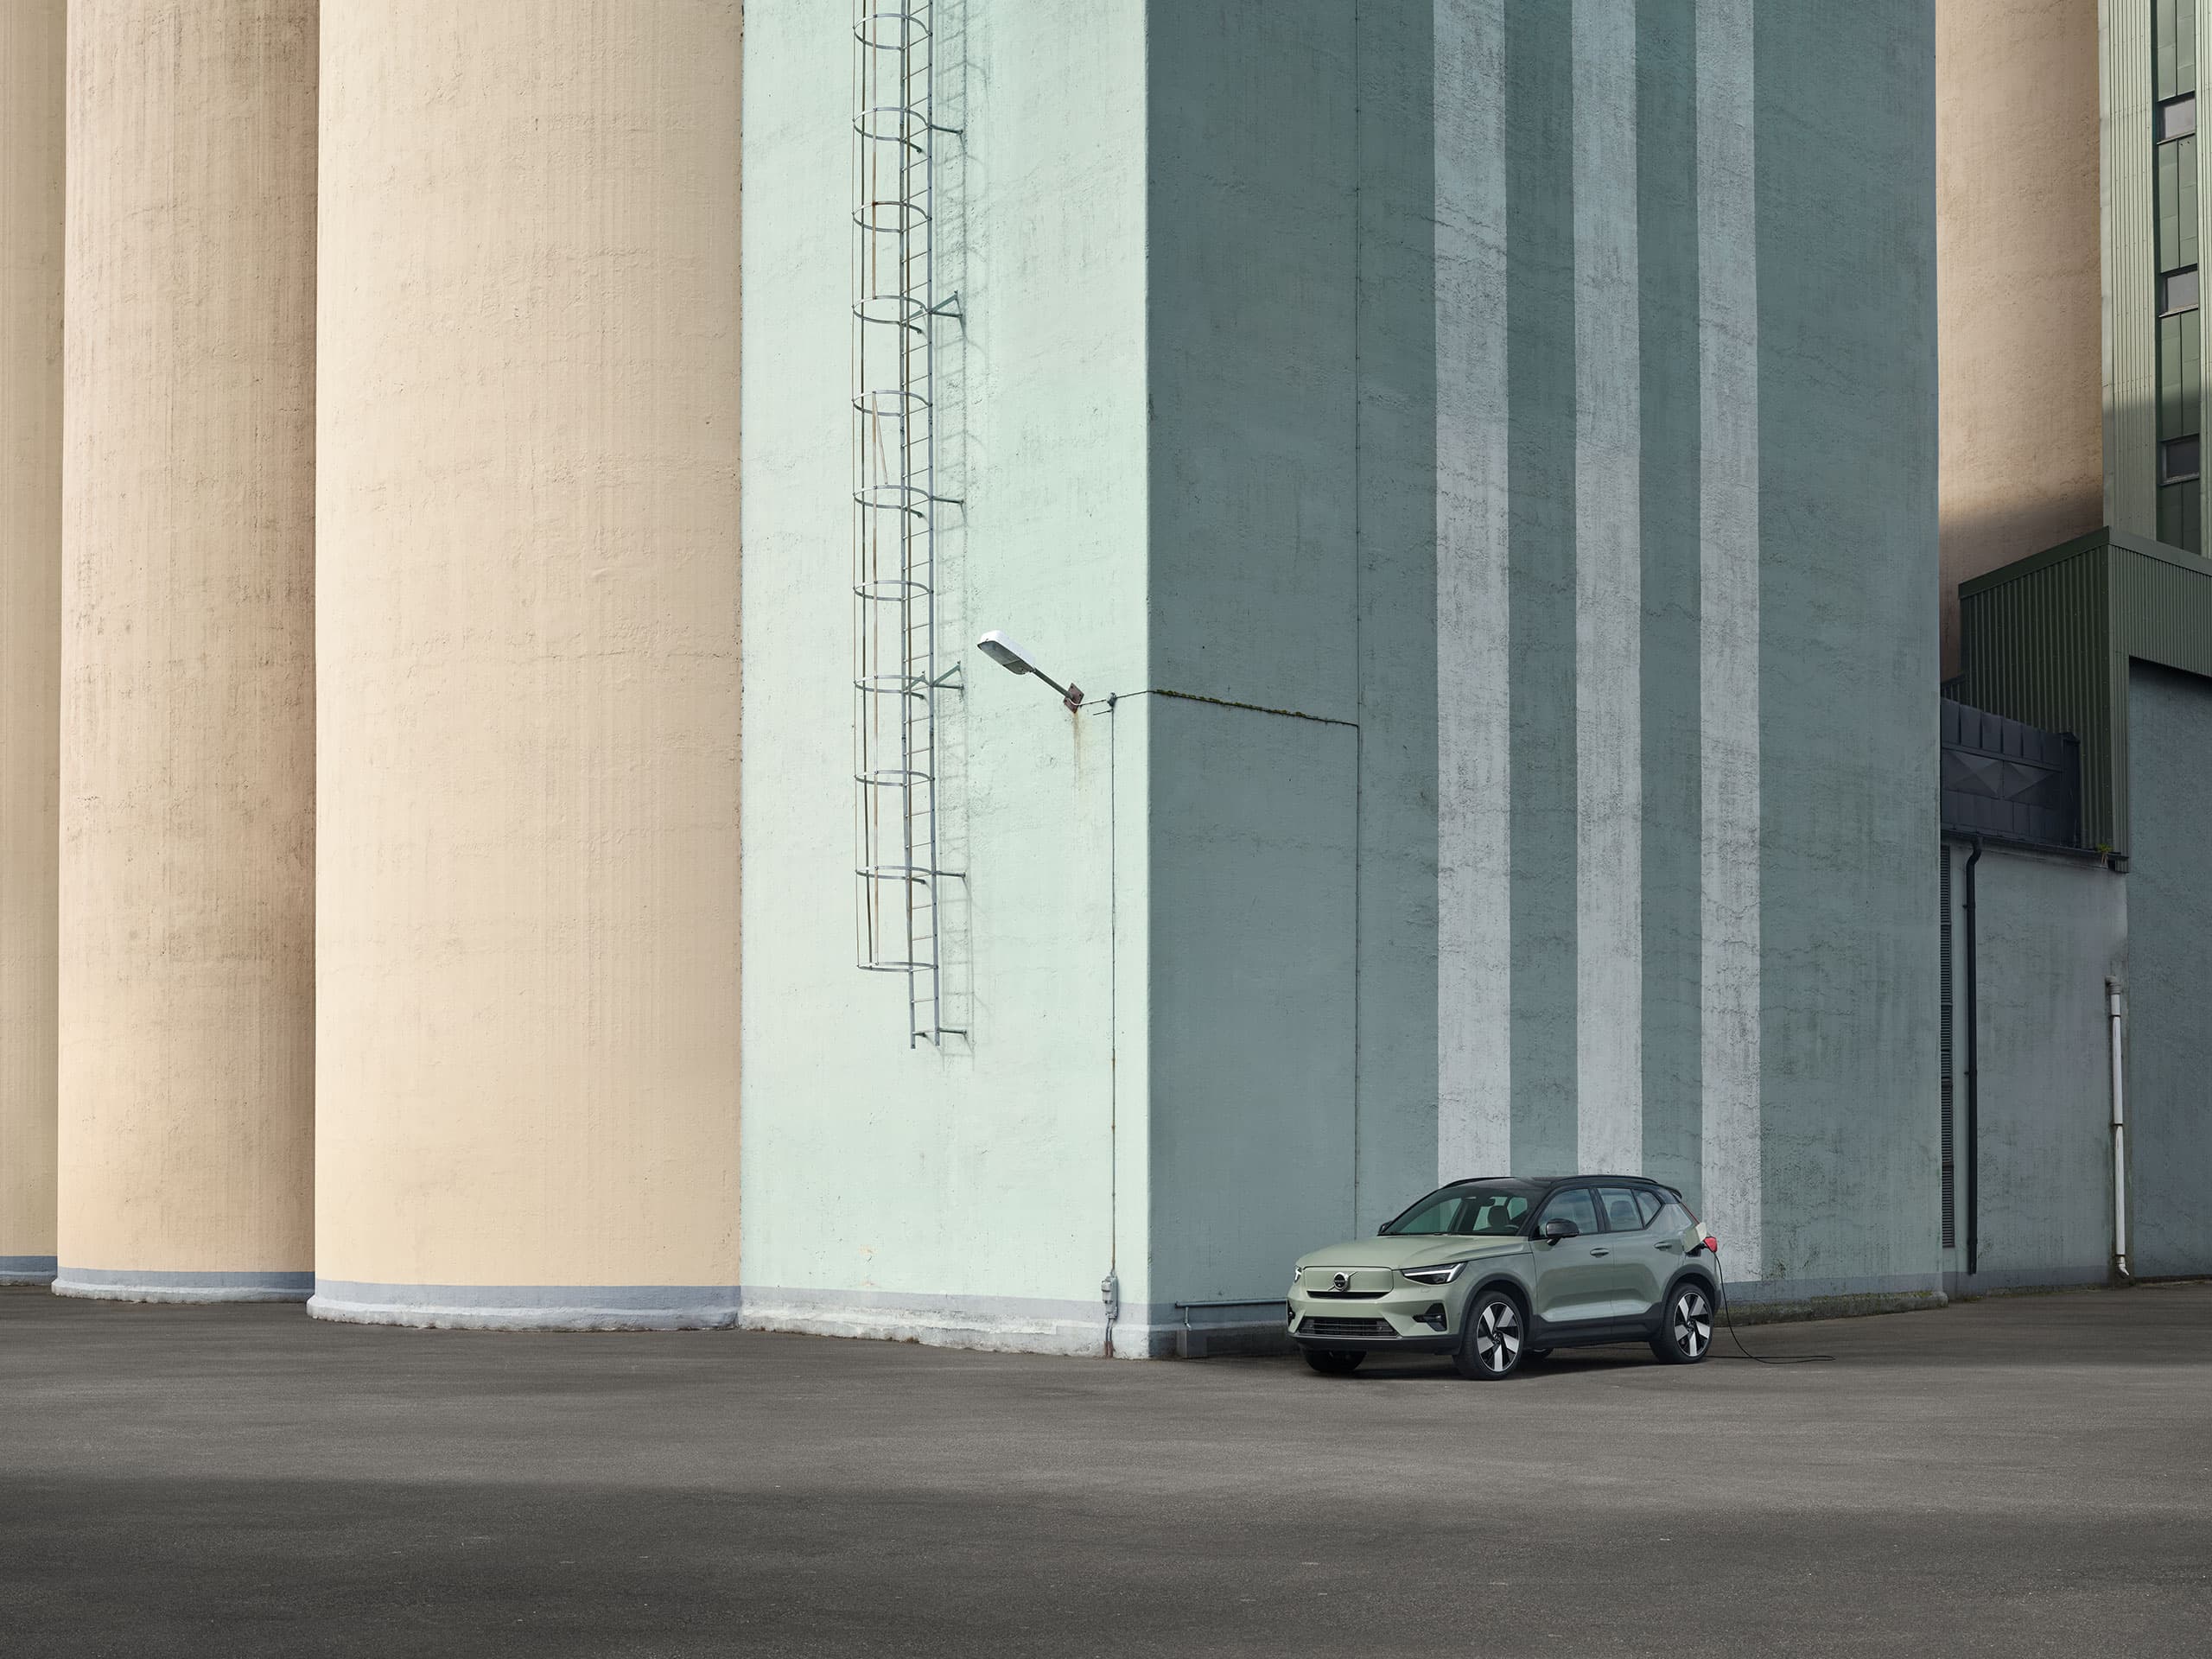 A sage green Volvo EX40 parked next to a large concrete building.